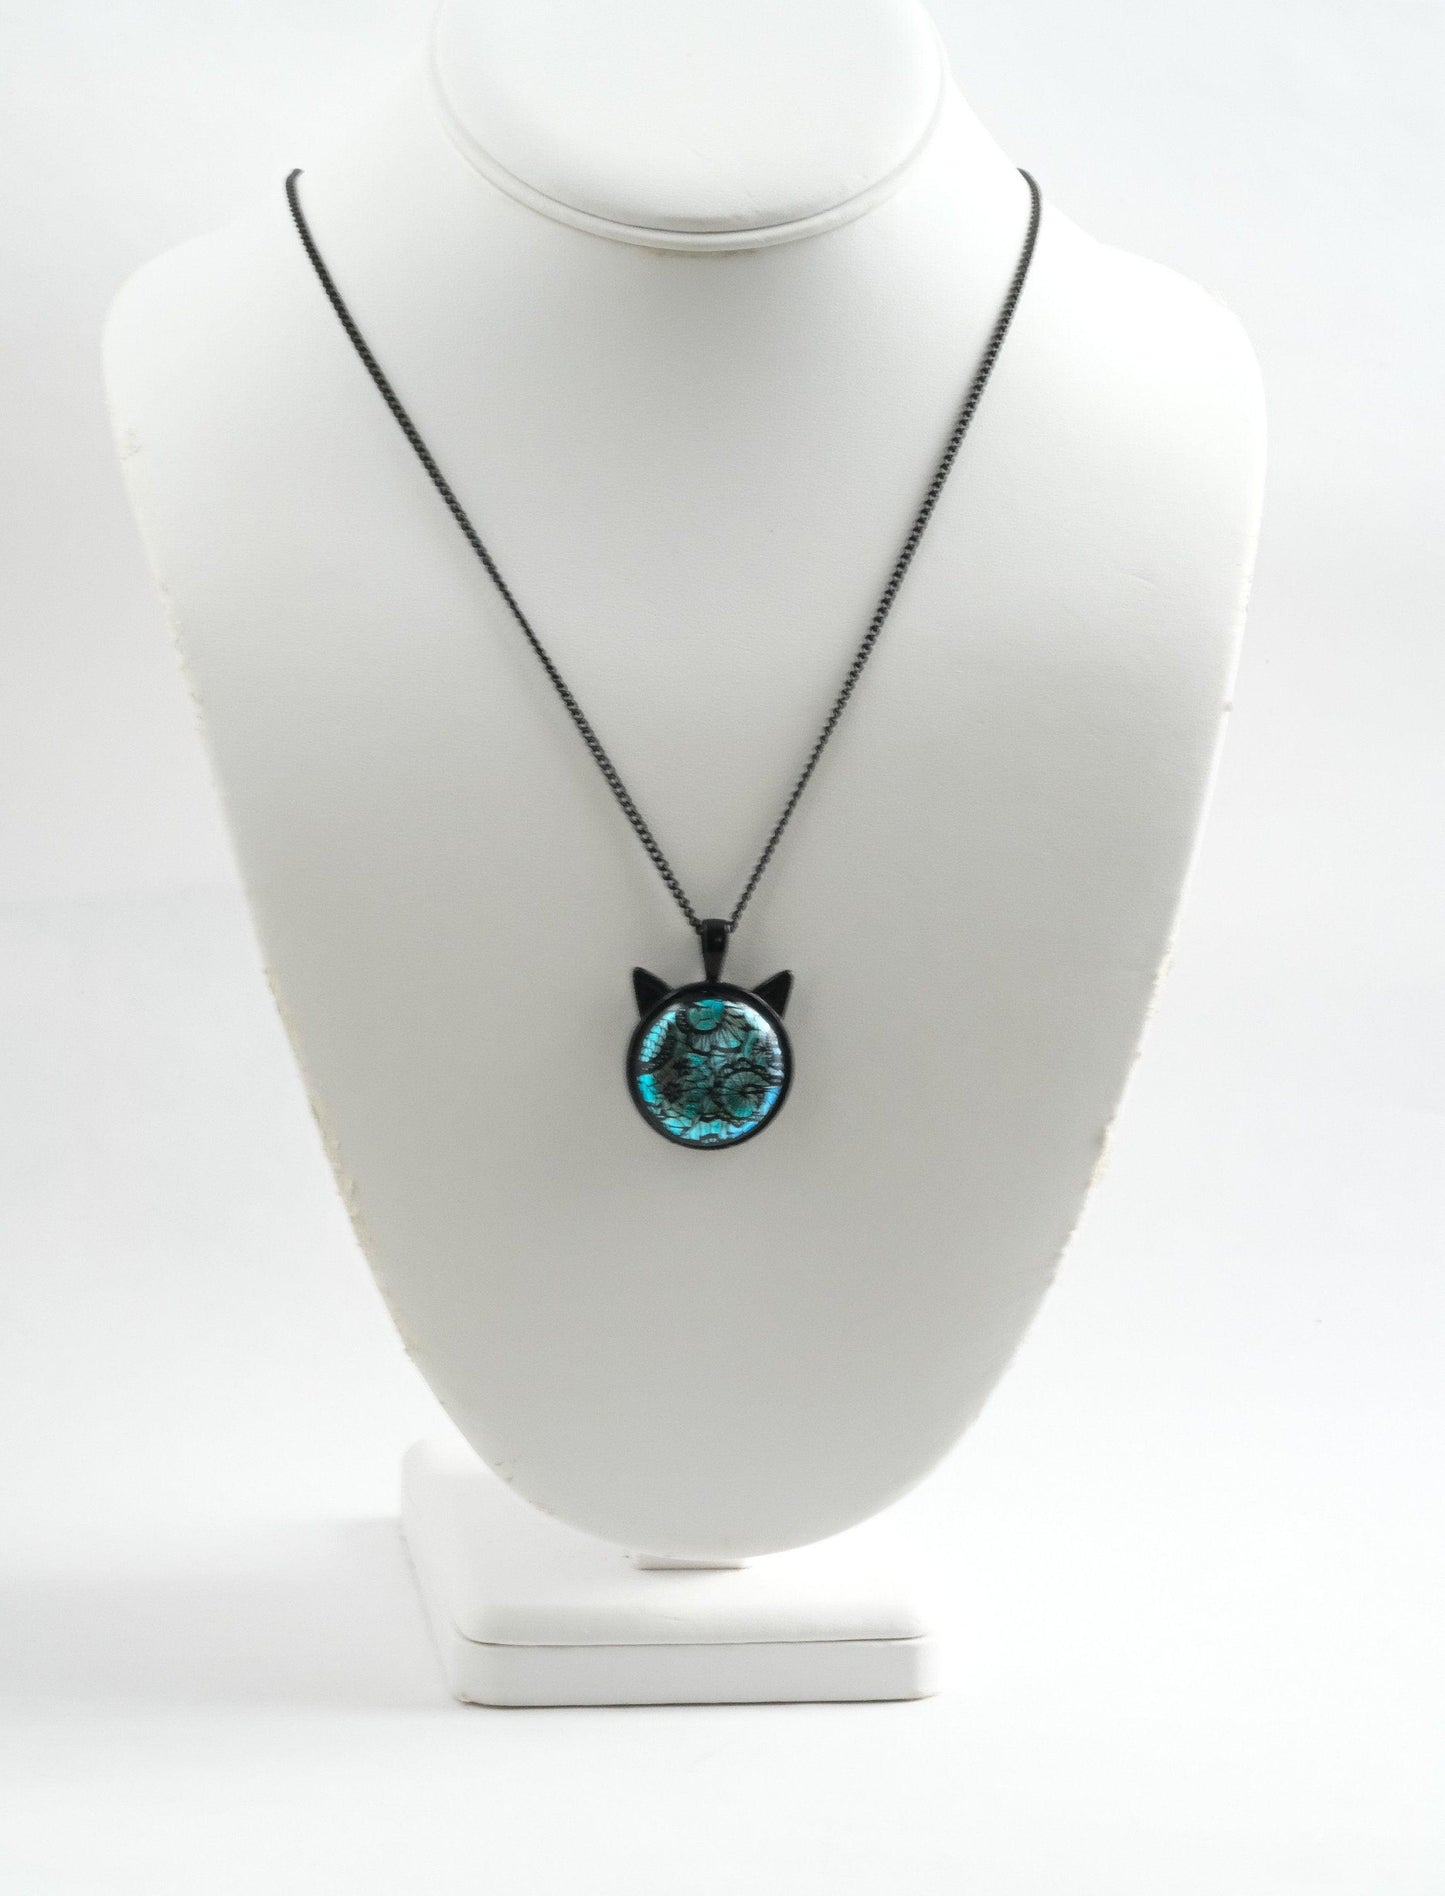 Magical Black Cat Pendant Necklace with Blue and Black satin finish lace look Dichroic Glass Center Stone on 20 in black chain seeds glassworks seedsglassworks